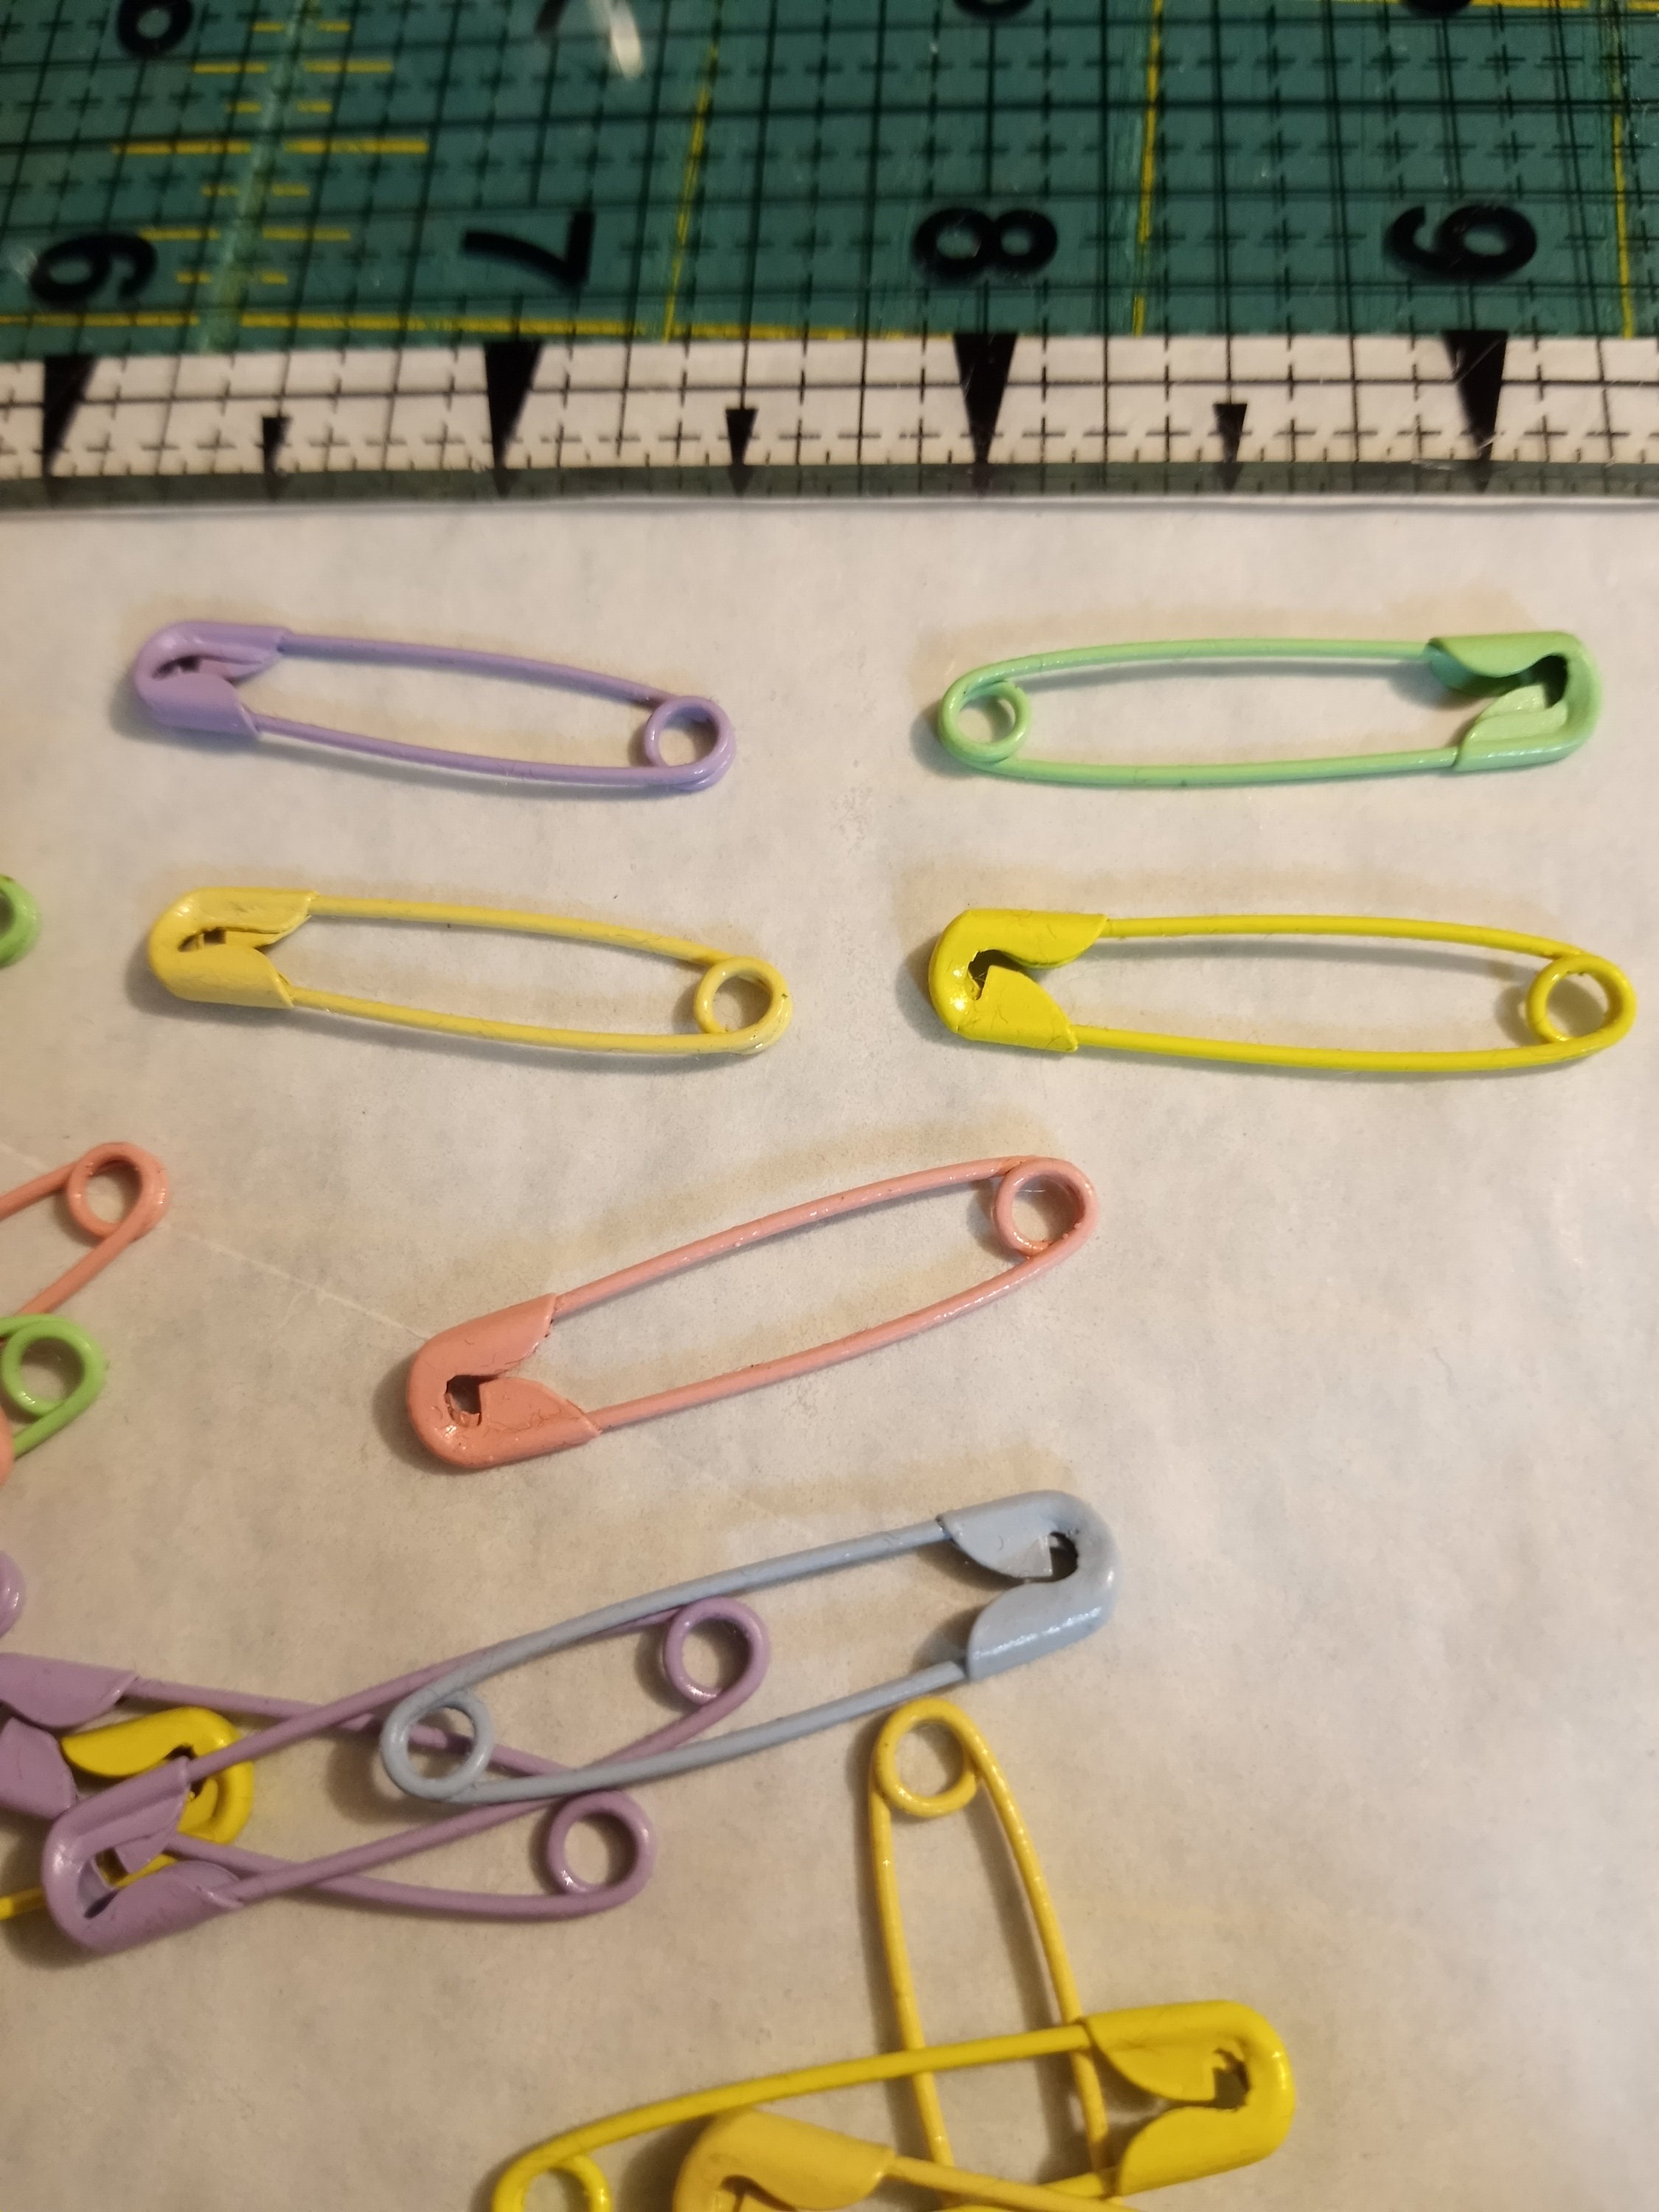 24 Mini Painted Safety Pins 6 Primary Clrs Cardmaking Scrapbooking  Embellishment